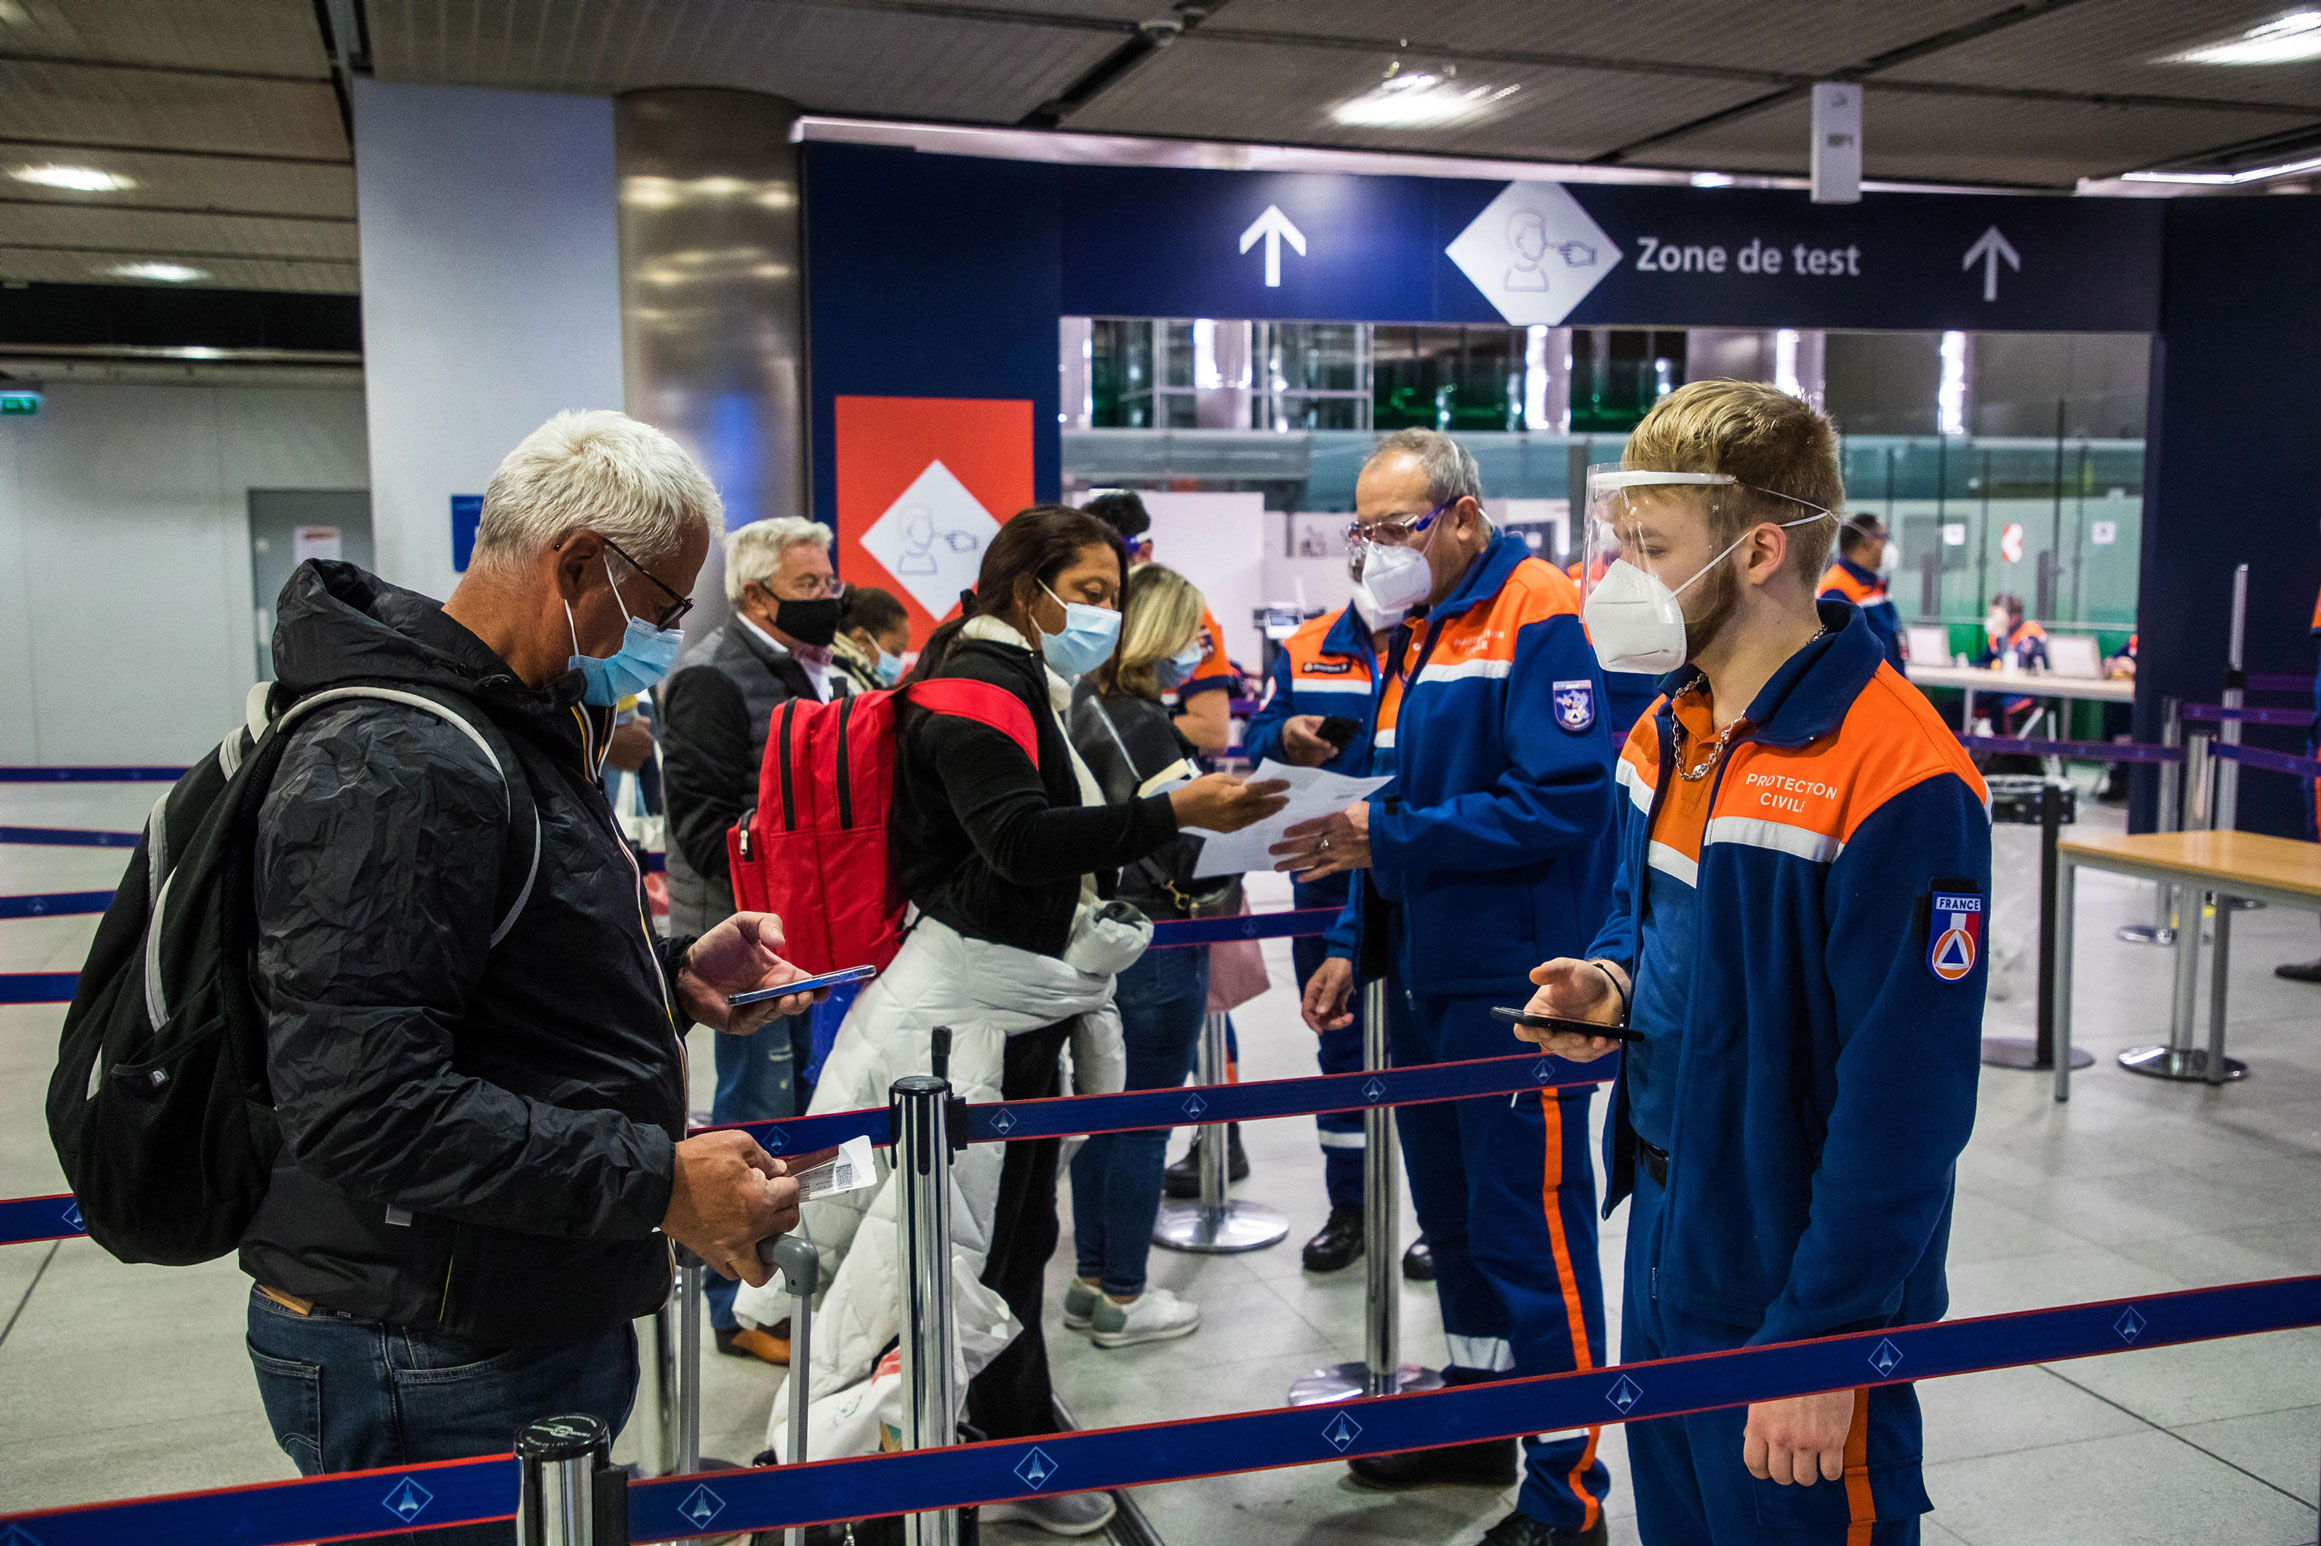 Health workers greet passengers arriving from an international flight before testing for Covid-19 tested at Paris-Charles de Gaulle airport in Roissy, France, on Tuesday.